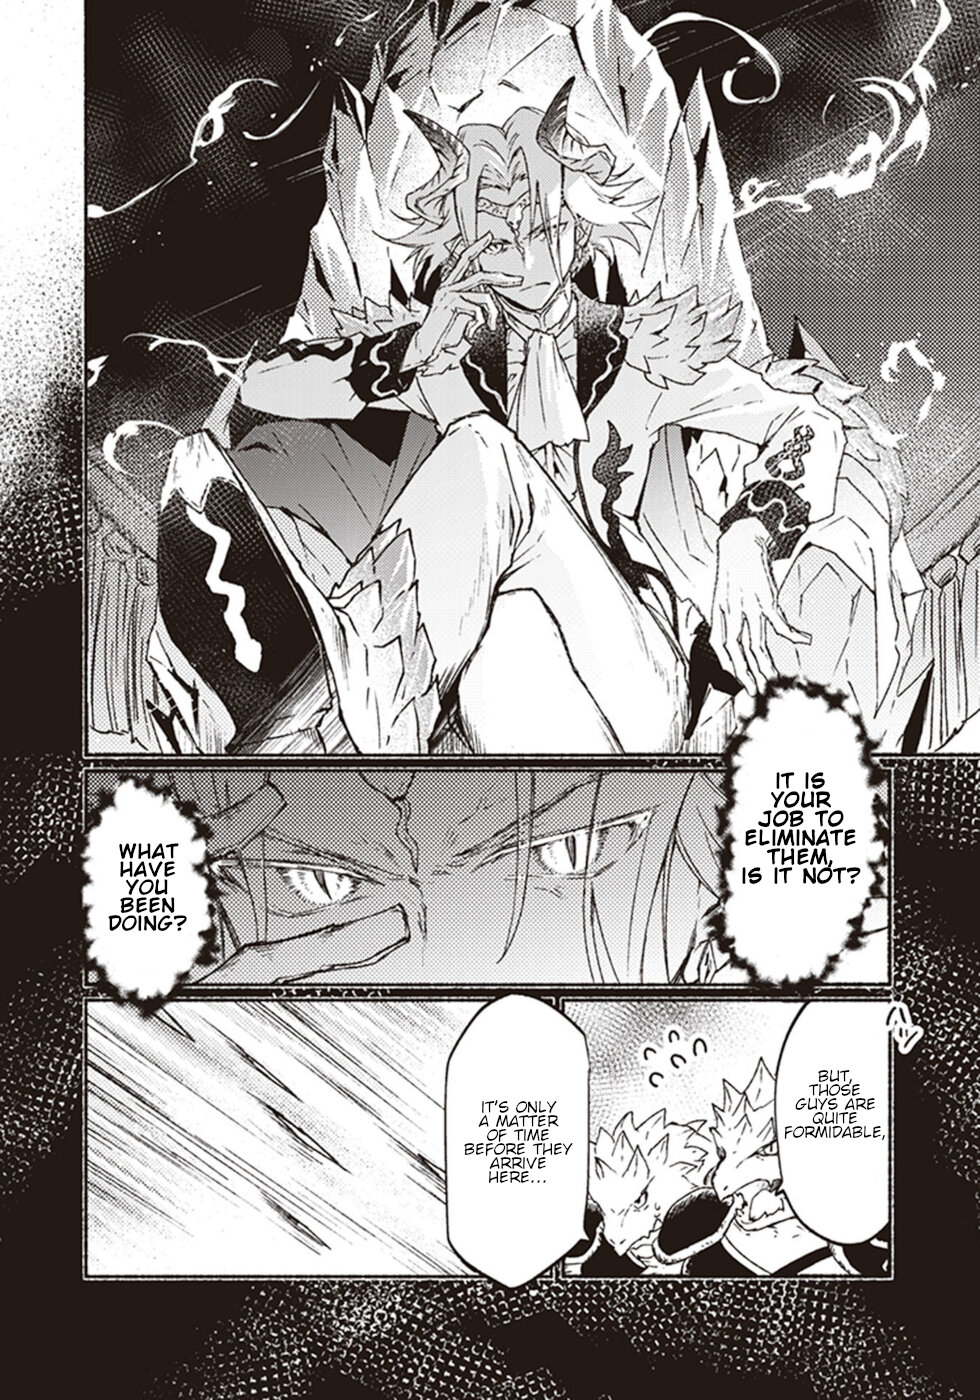 This Last Boss, the Church in Front of the Devil's Castle Vol. 2 Ch. 8 In A Moment, Desire To Protect, Once Again